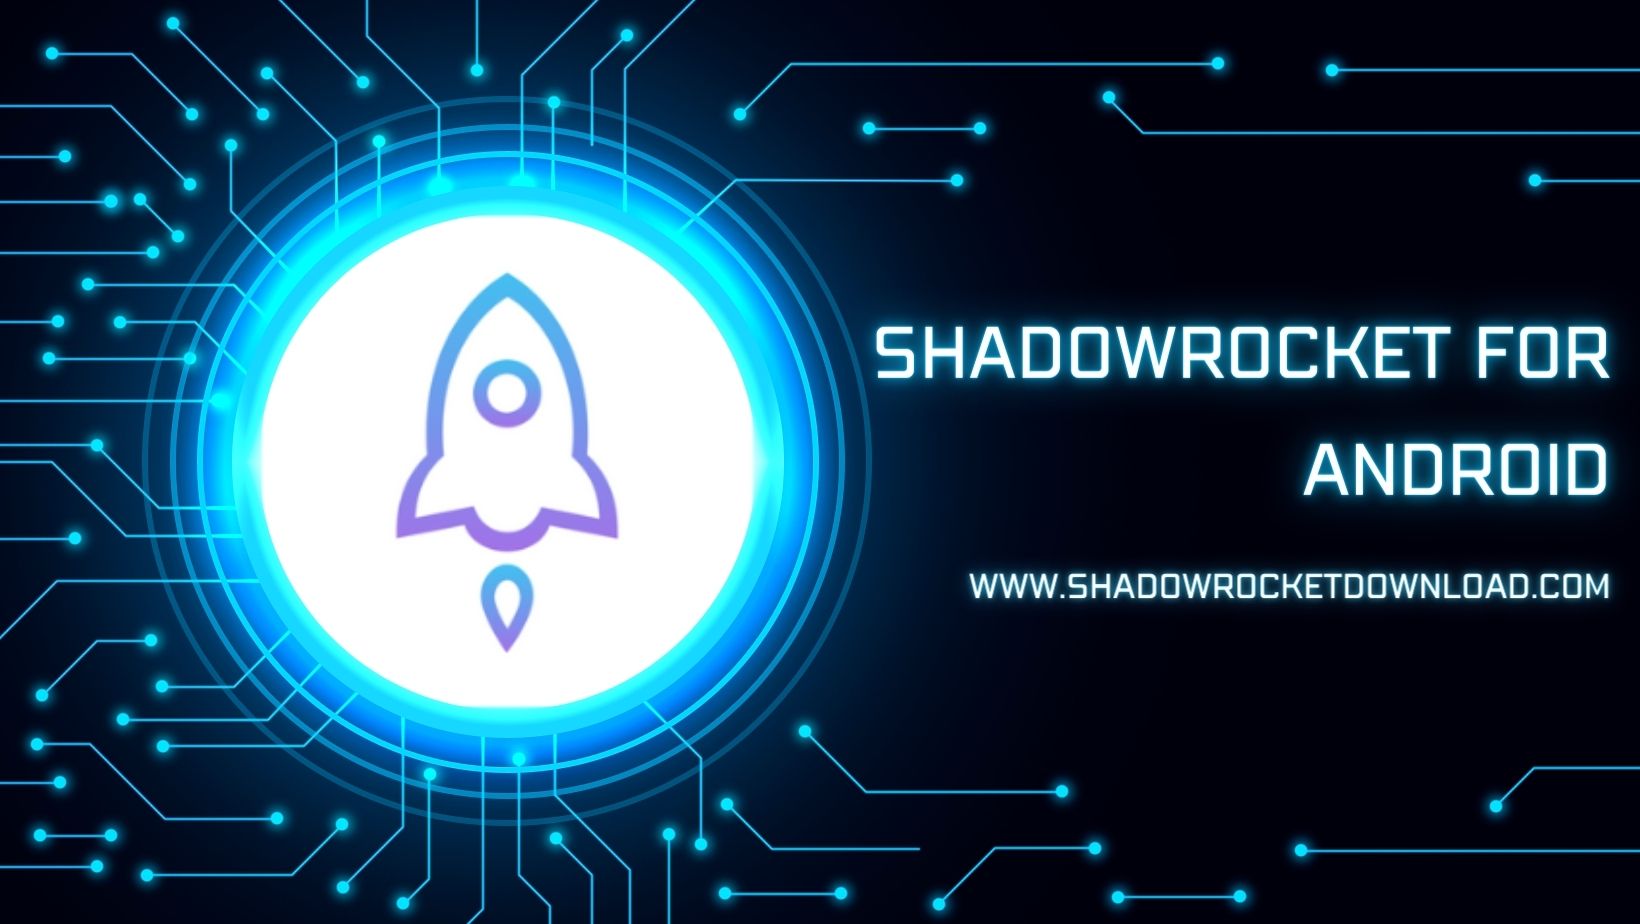 Shadowrocket For Android